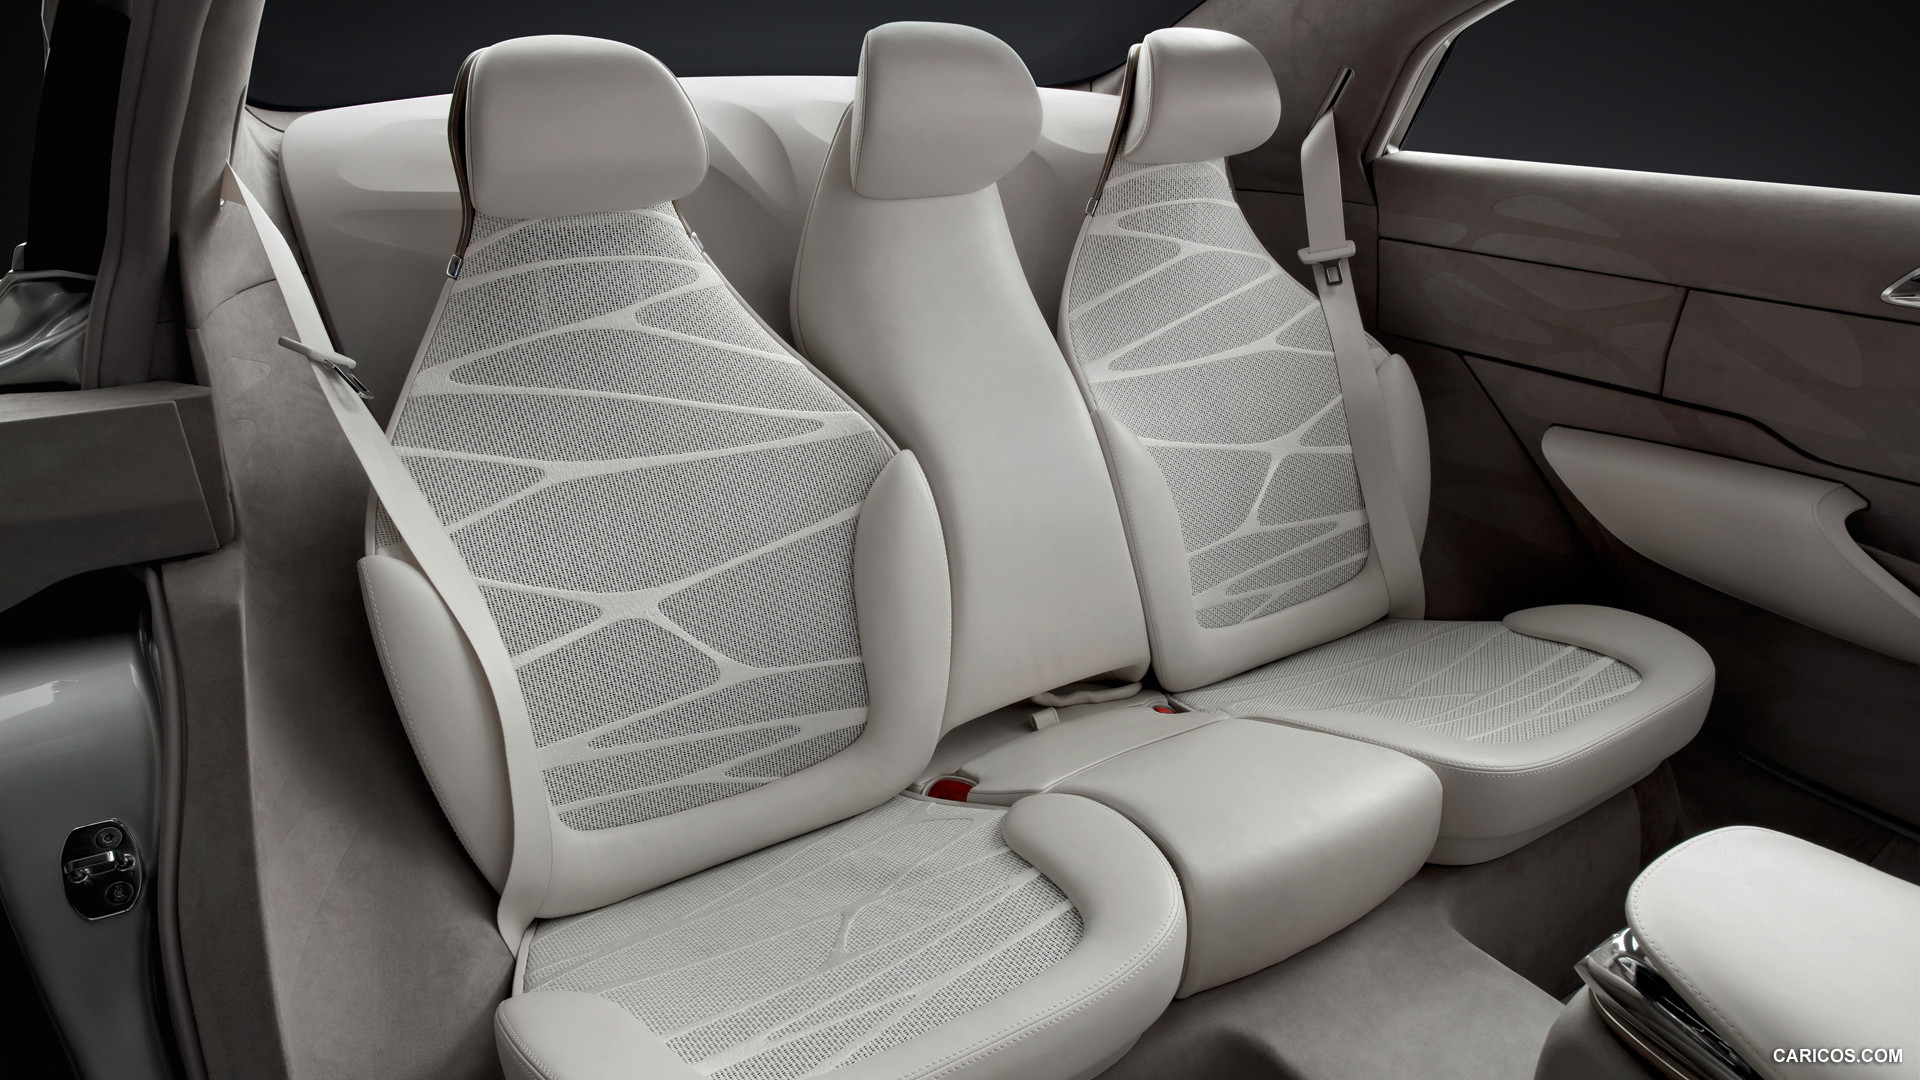 Mercedes-Benz F800 Style Concept (2010)  - Interior, Rear Seats, #47 of 120